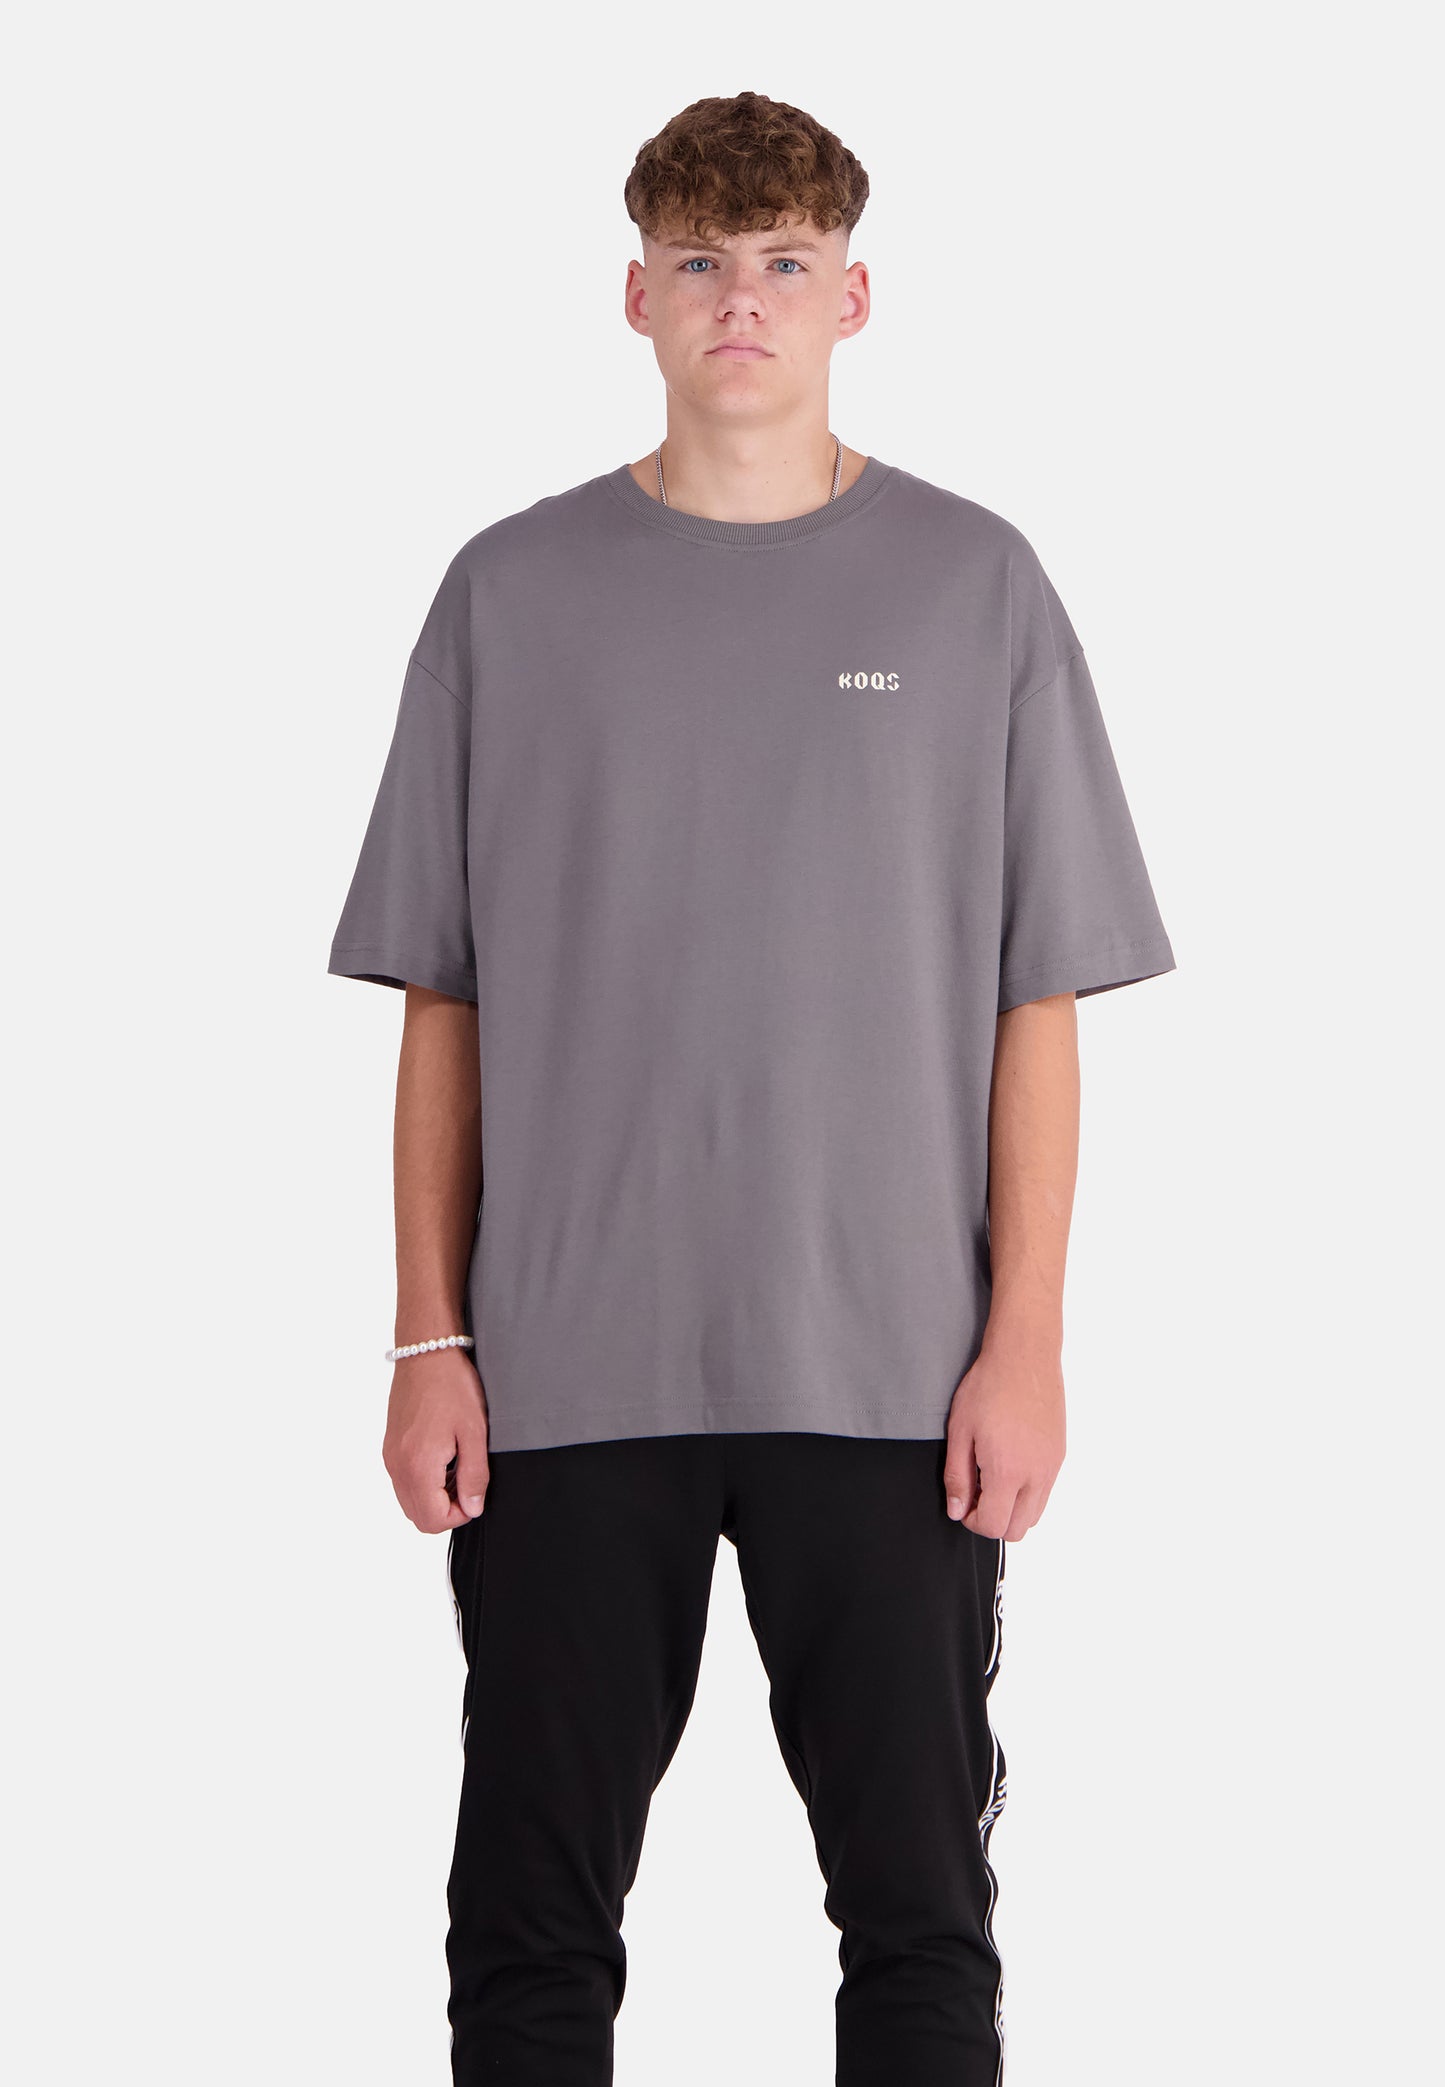 King of the Street Oversized T-Shirt